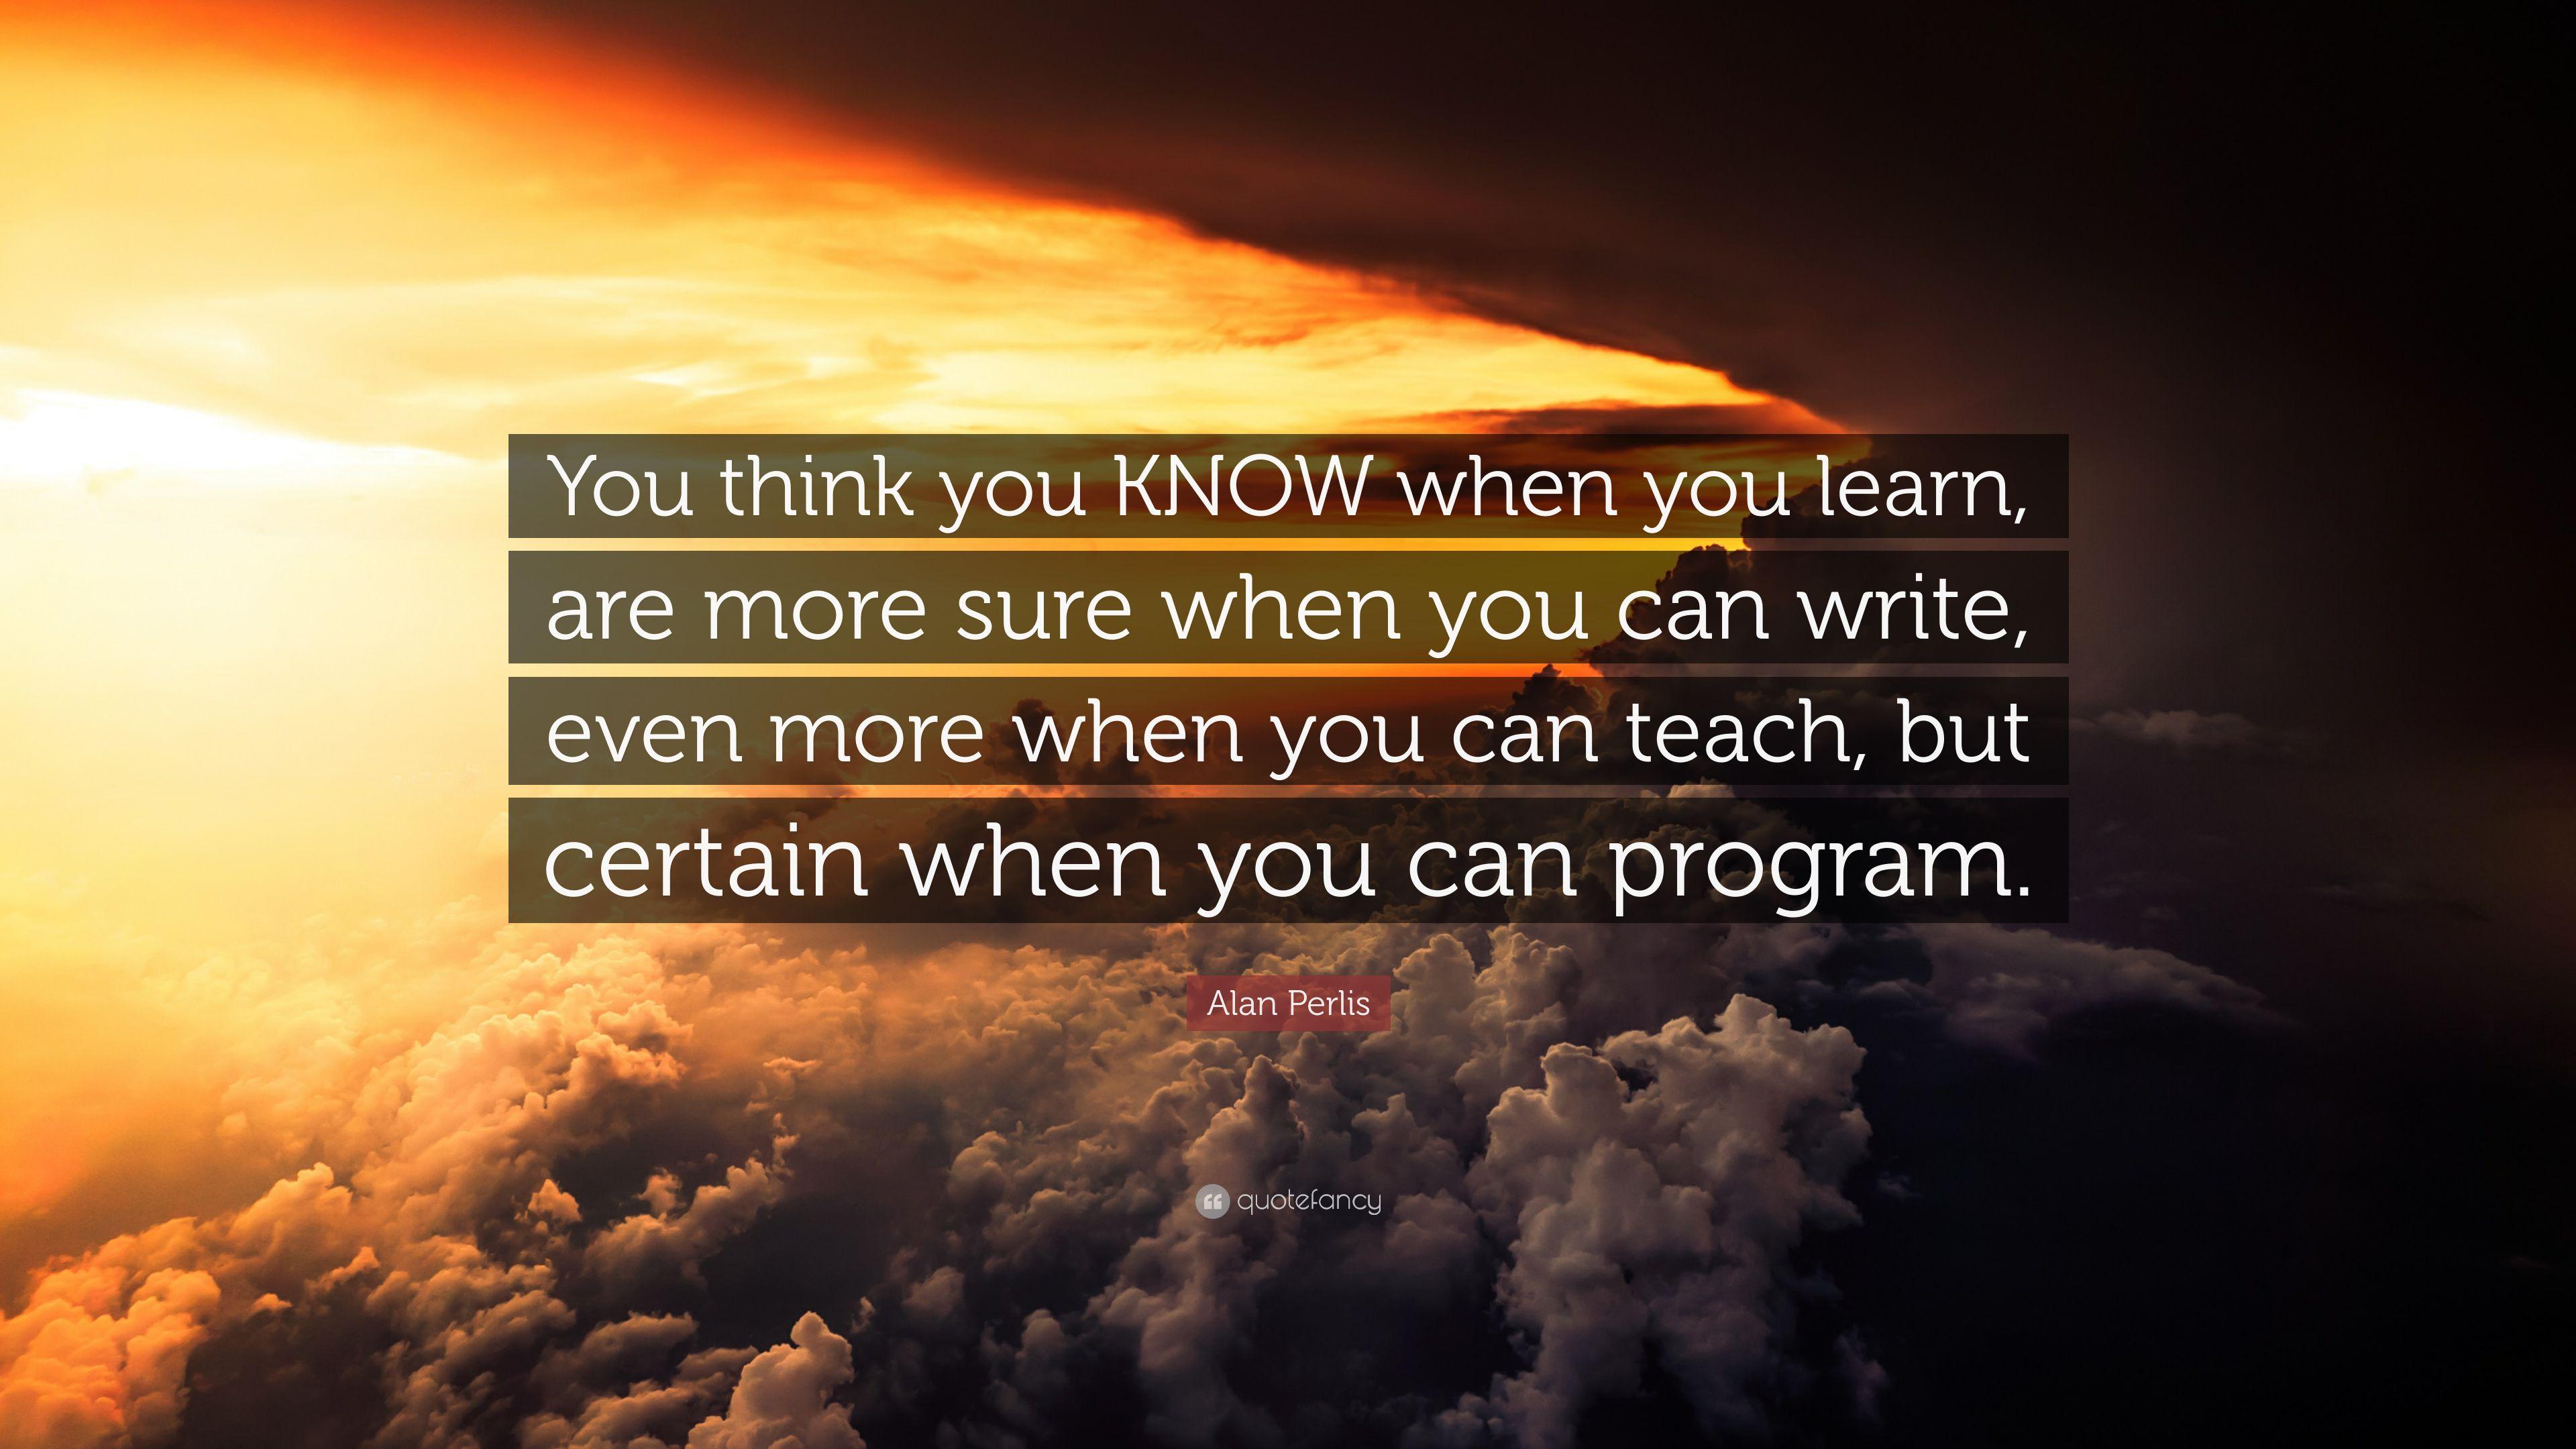 Alan Perlis Quote: “You think you KNOW when you learn, are more sure